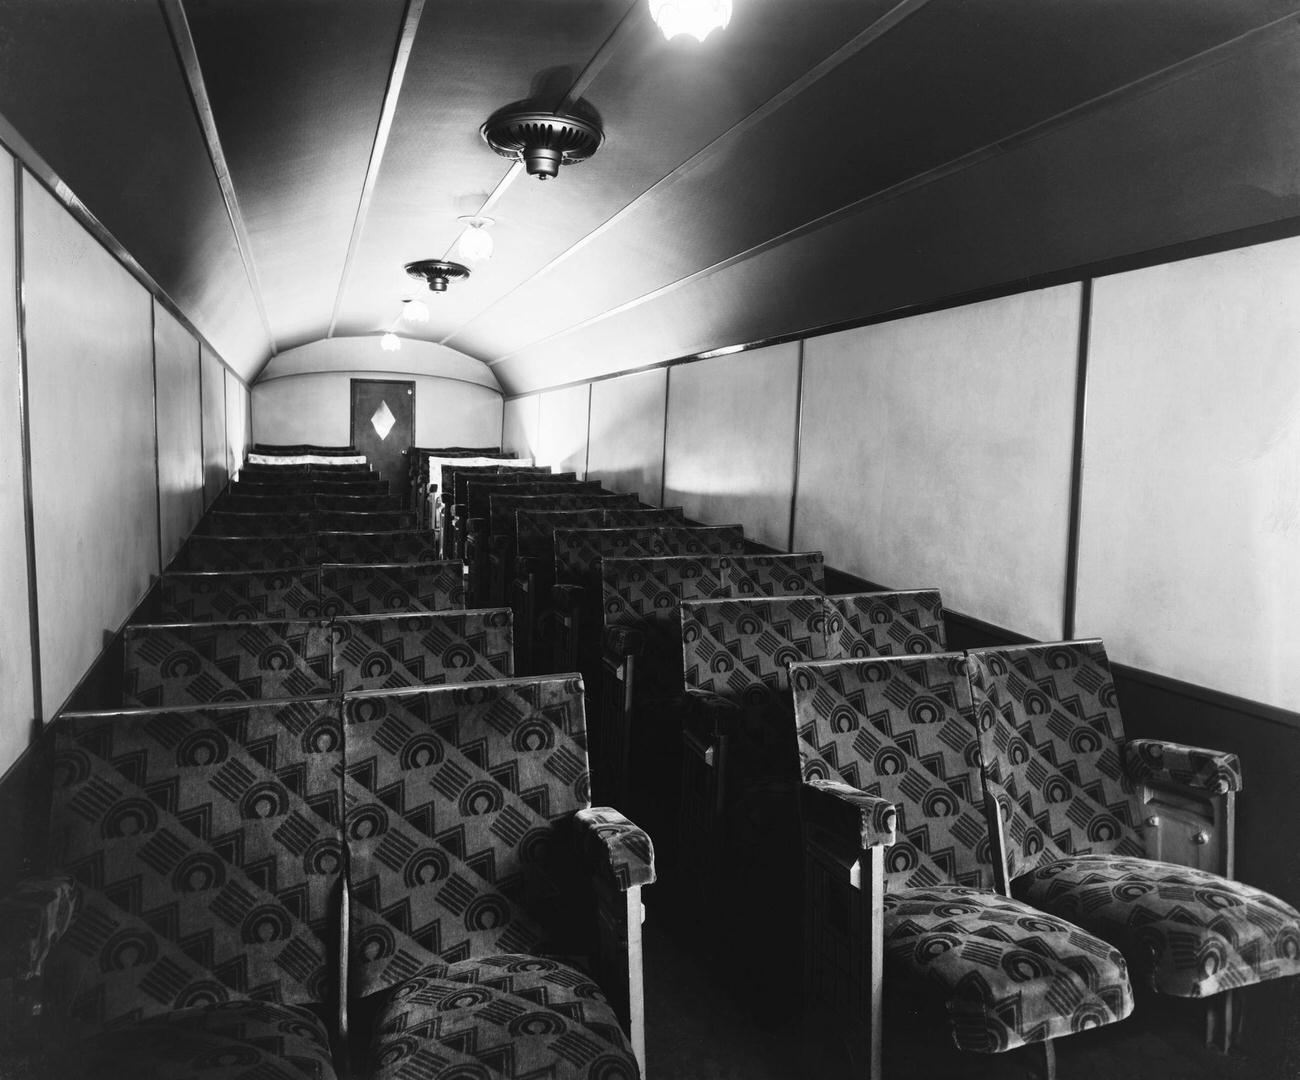 The London & North Eastern Railway was the only company to use cinema coaches.